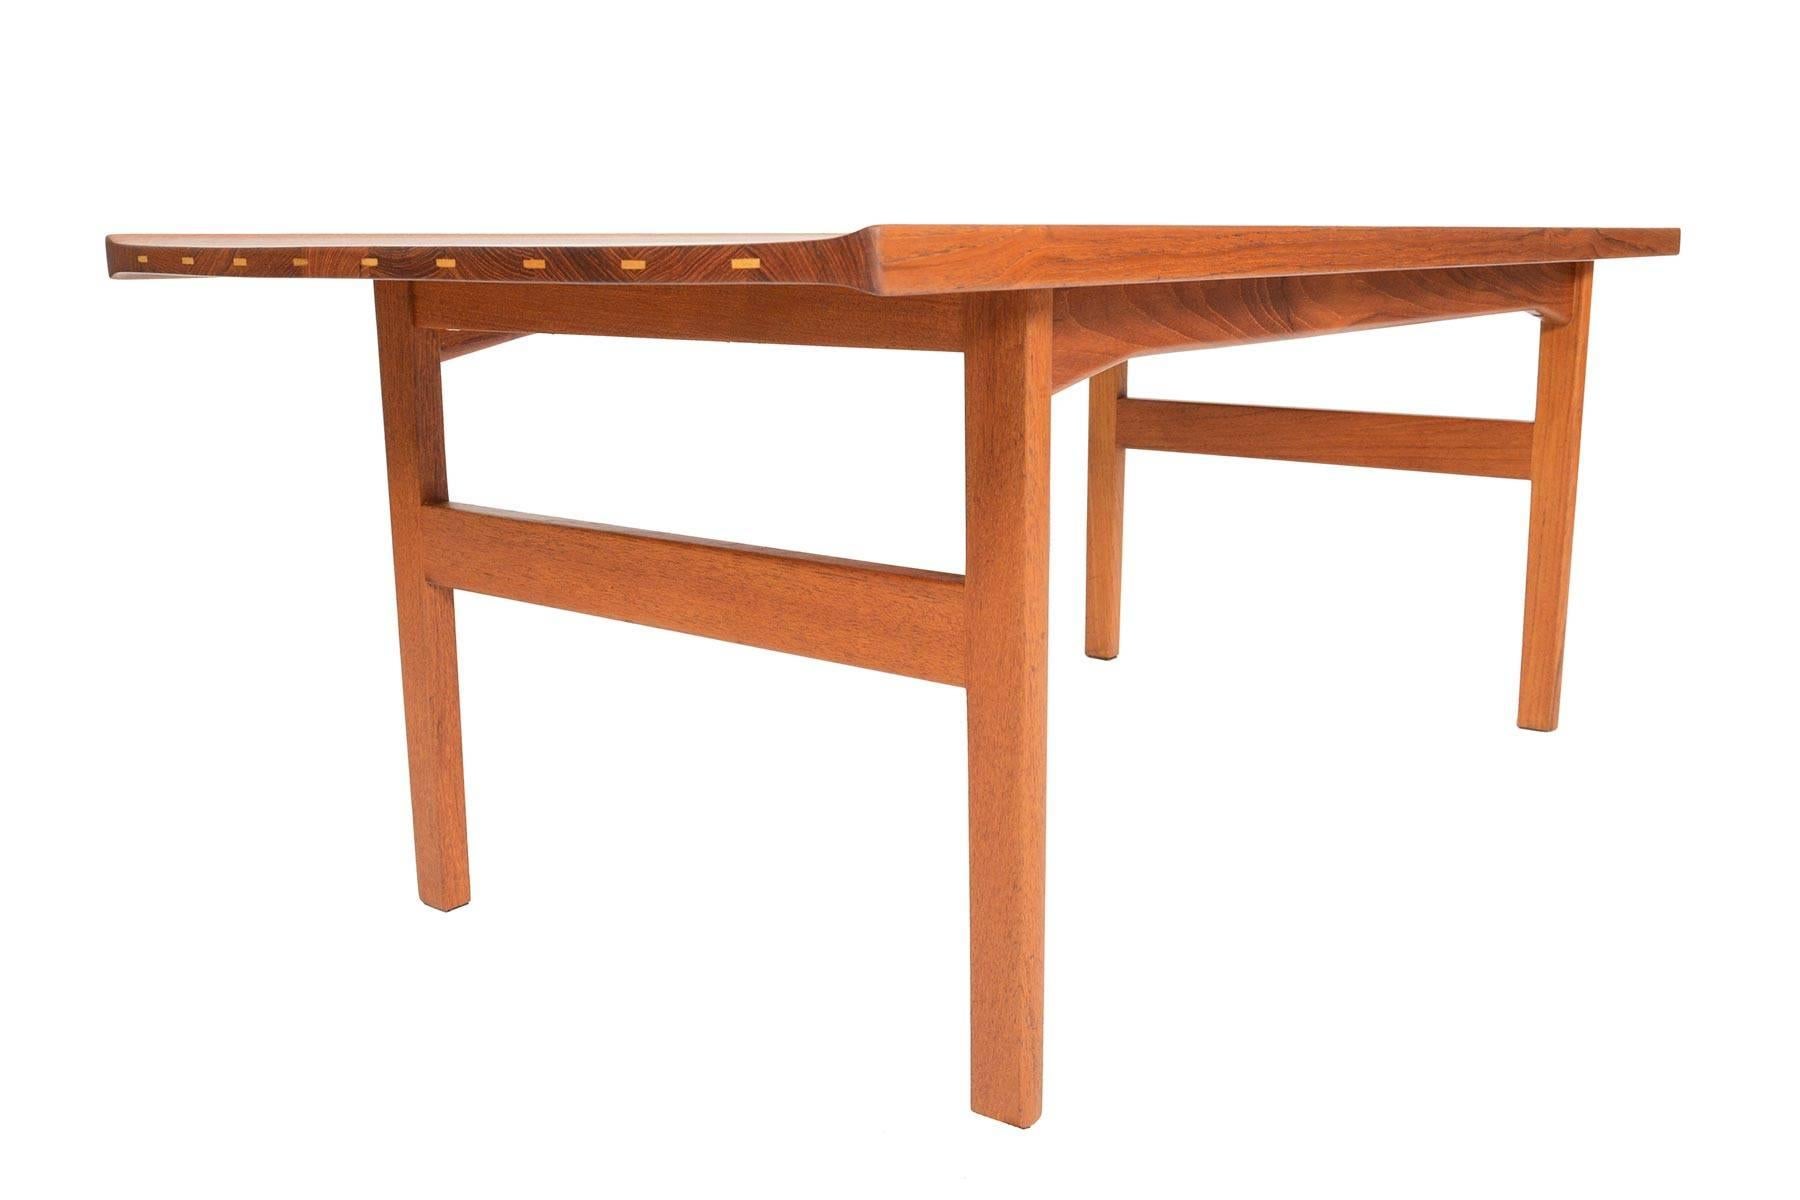 Scandinavian Modern Refinished Solid Teak Coffee Table by Tove and Edvard Kindt - Larsen